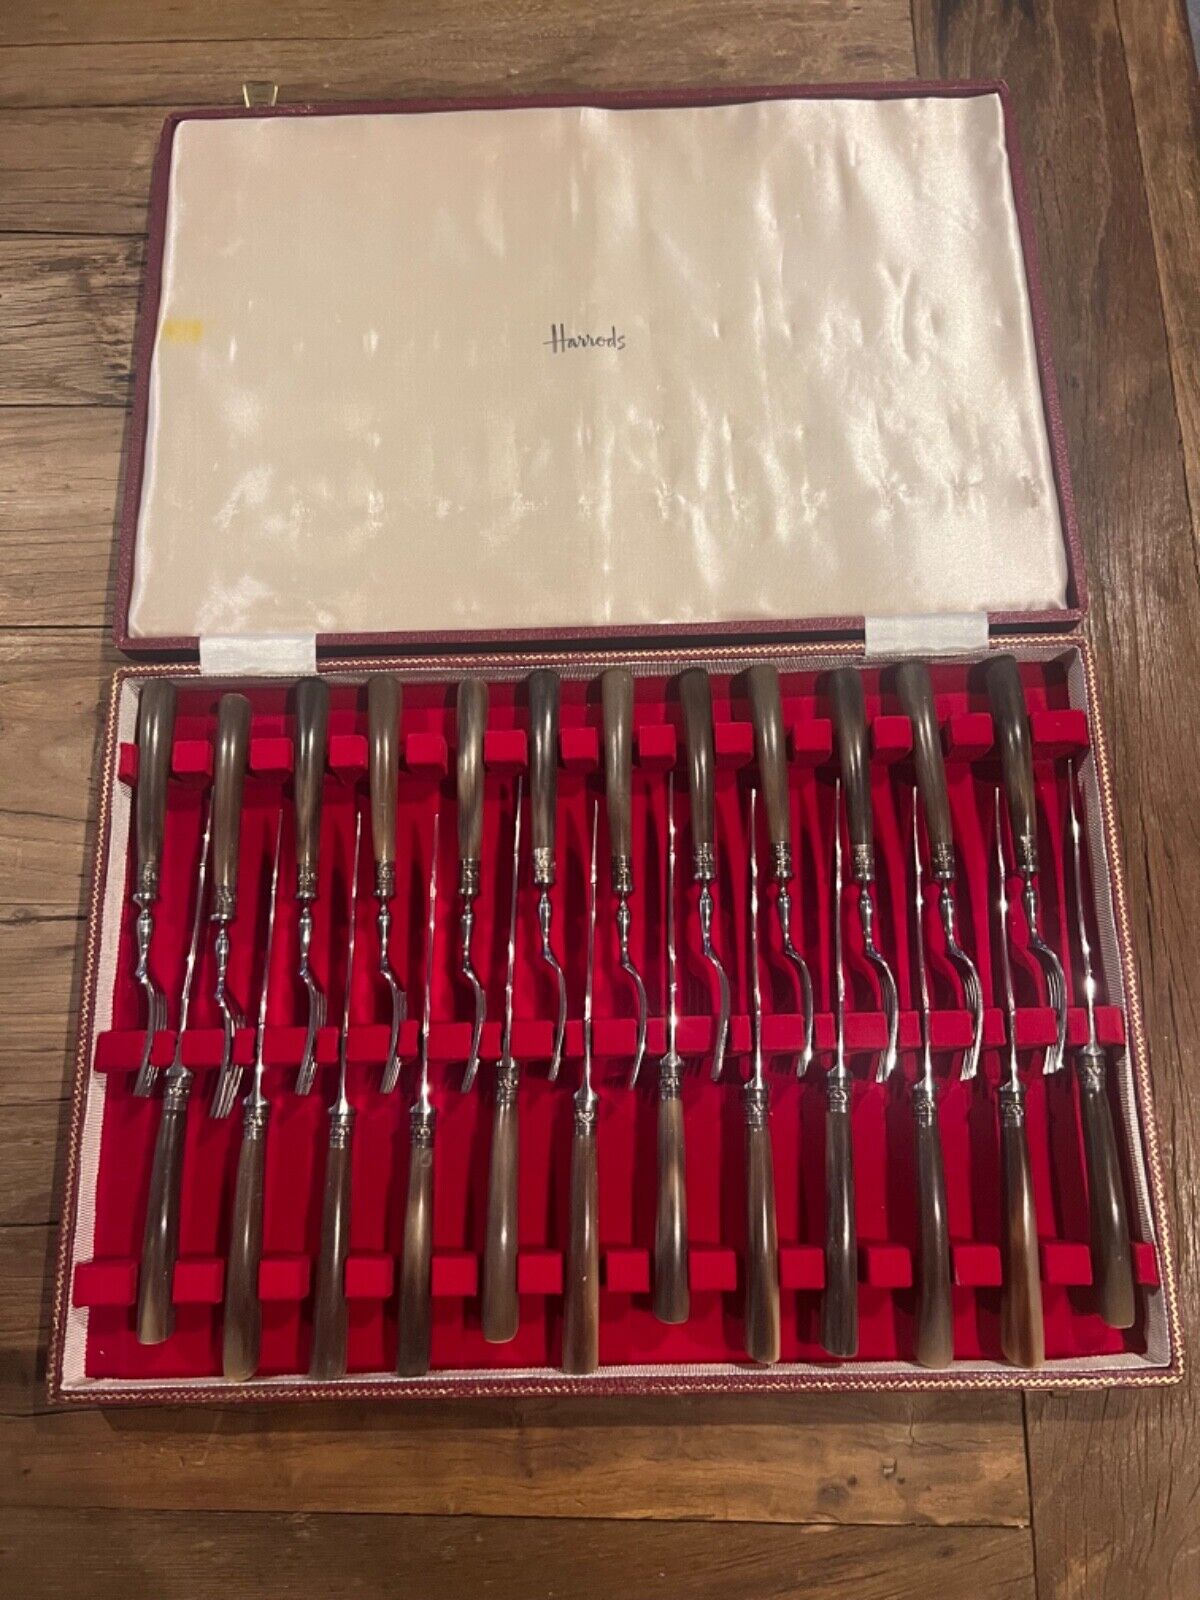 HARRODS CUTLERS & SILVERMITHS FISH SET+12 KNIVES+ 12 FORKS +ORIGINAL BOX